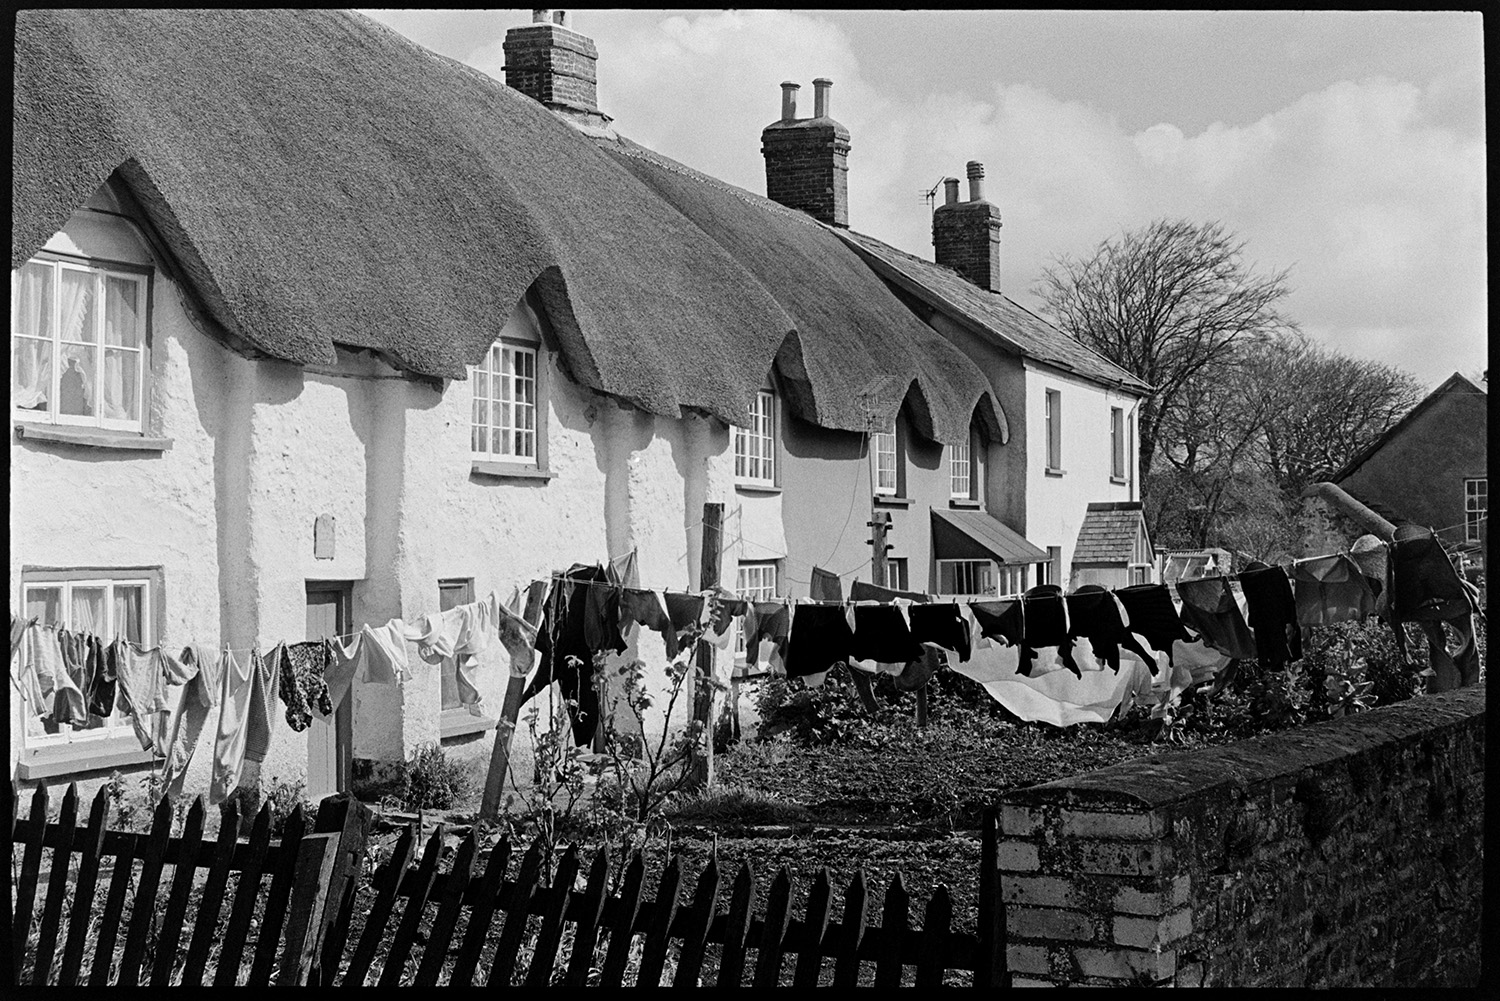 Thatched cottages with clothes on washing line. 
[A row of thatched cottages with eyebrow eaves in Dolton. Washing is hanging out to dry on washing lines in the gardens of the cottages.]